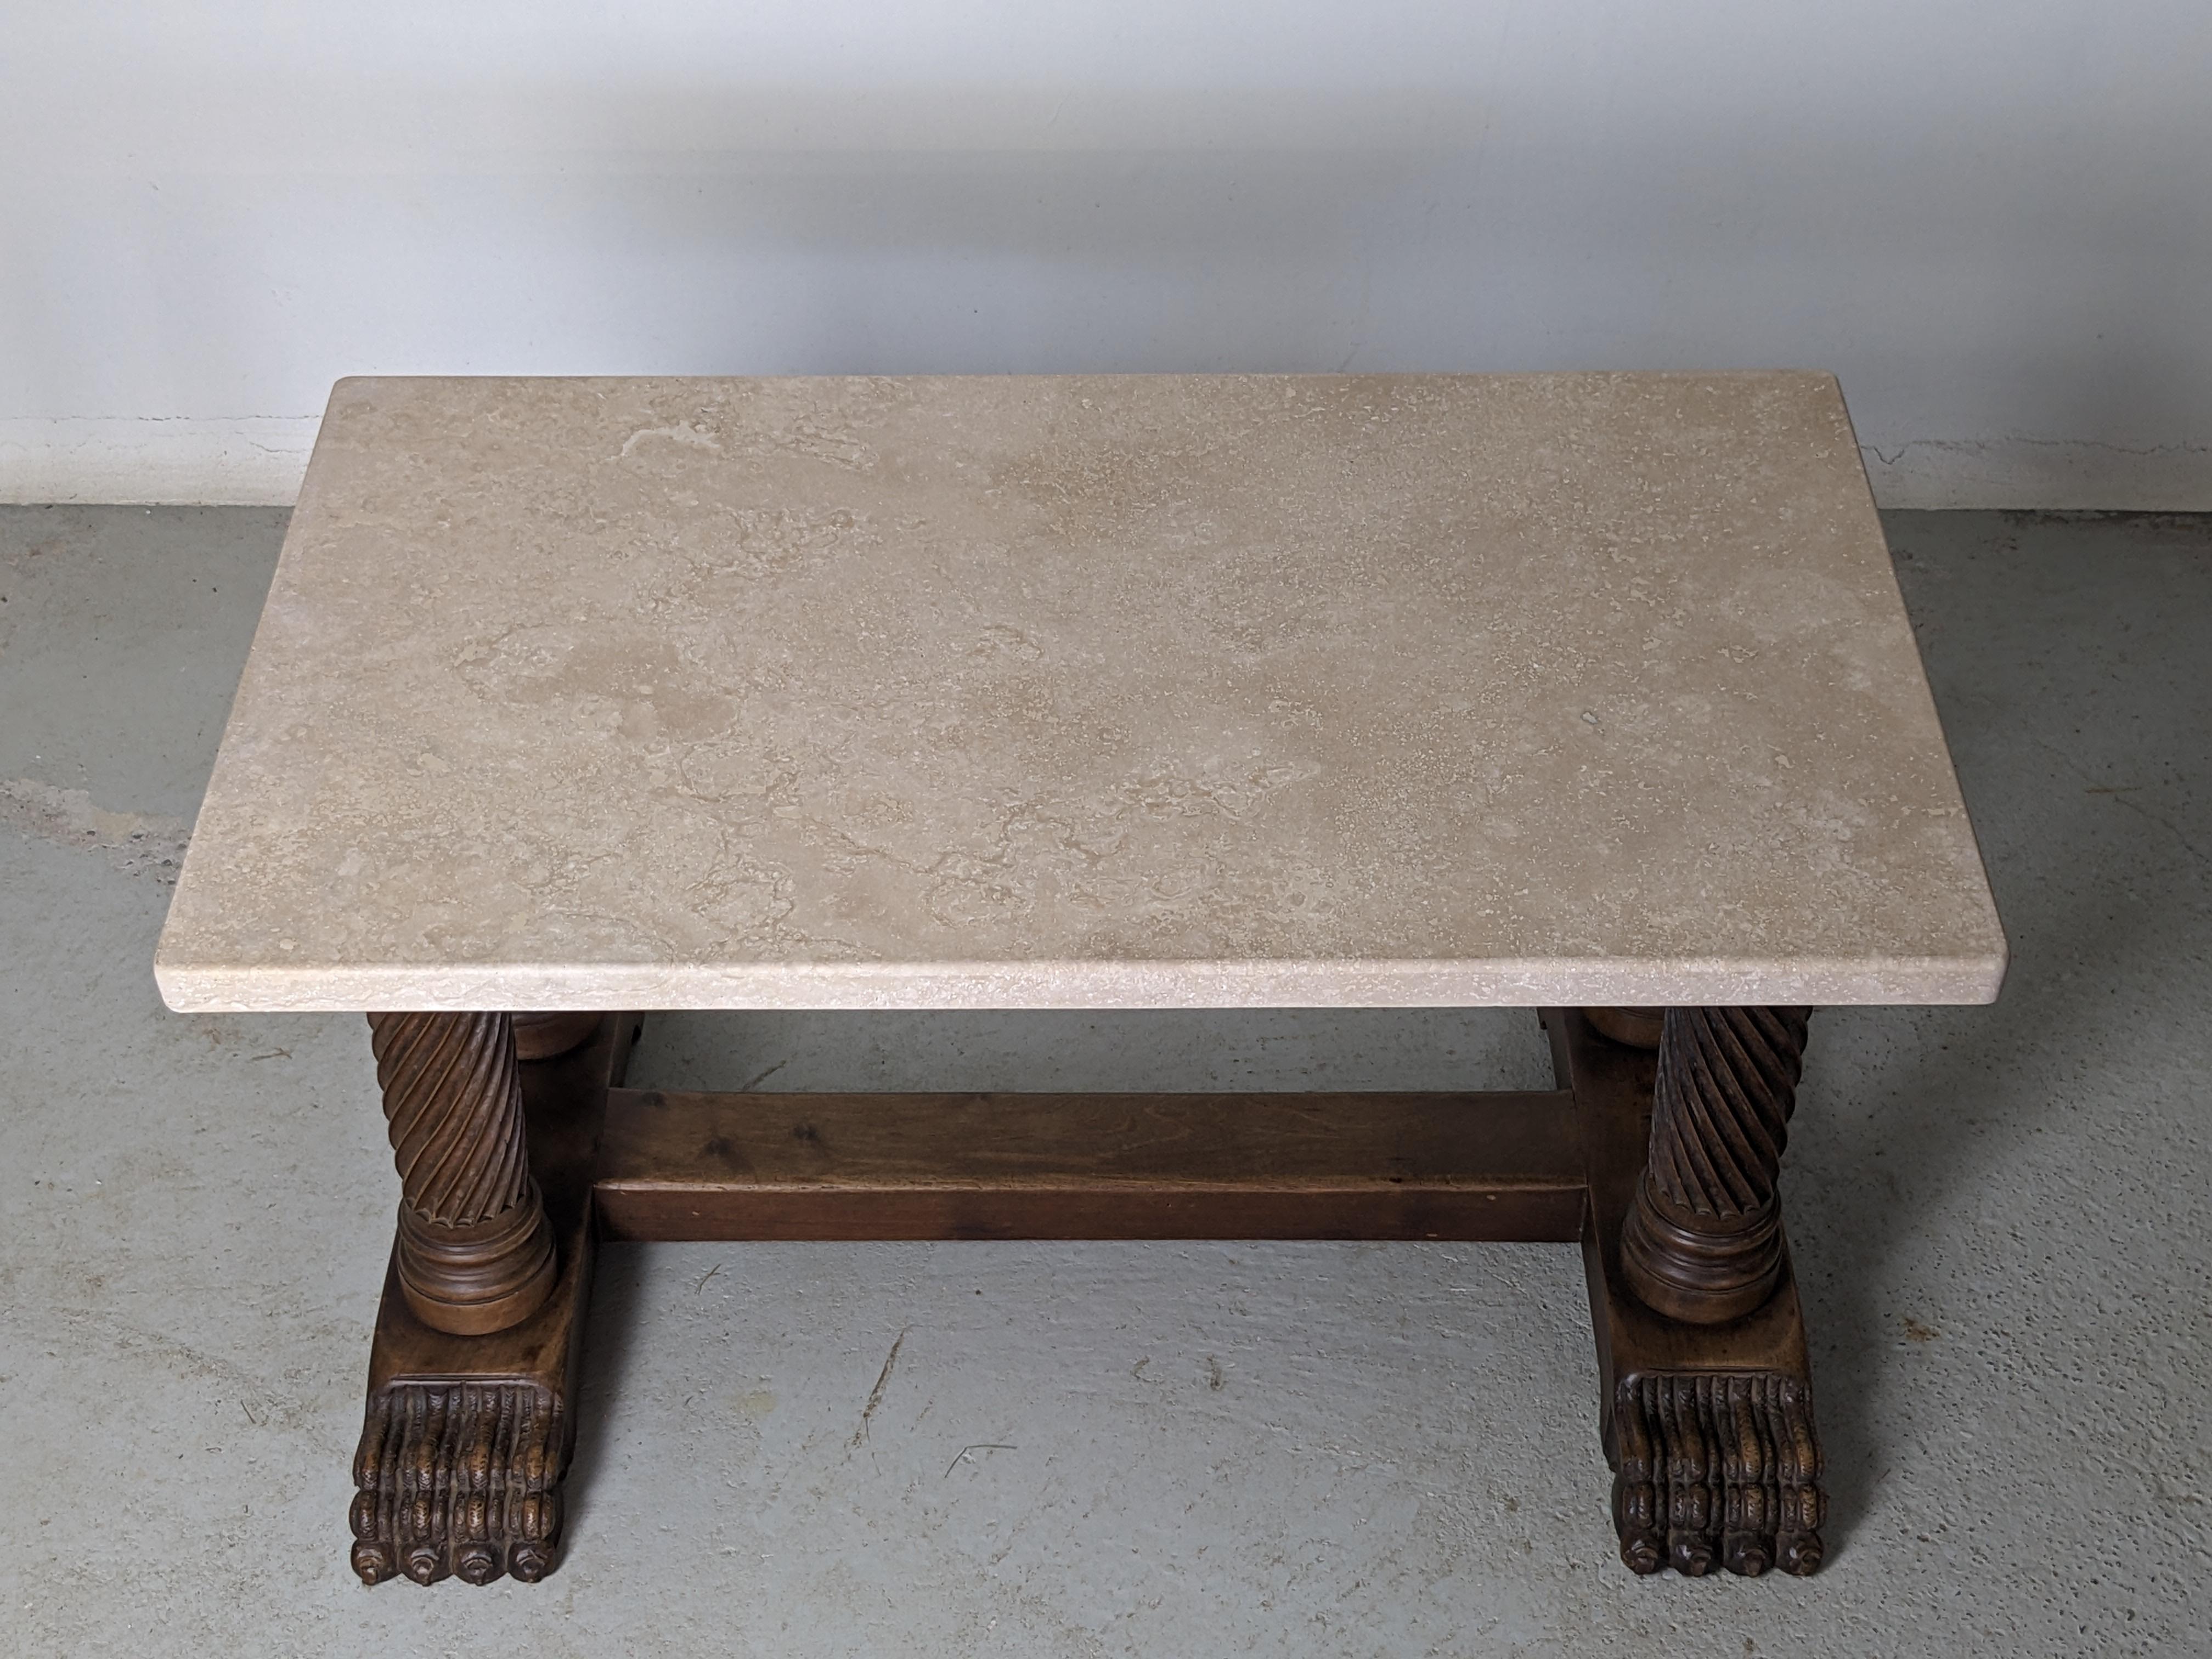 Art Deco Coffee Table, Sculpted Wood Base & Travertine Top, France 1940s For Sale 4